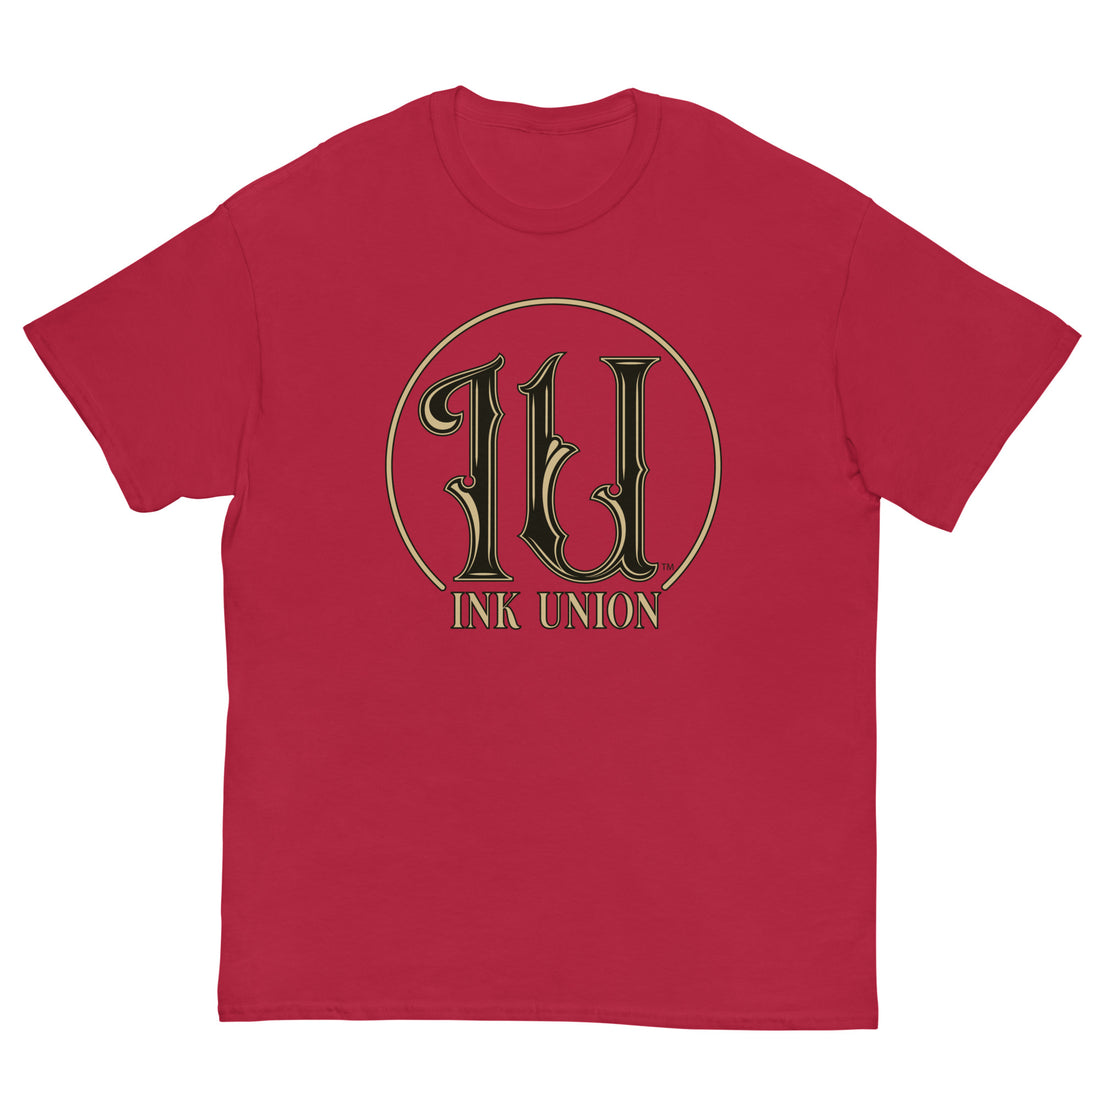 Ink Union Clothing Co. cardinal red t-shirt featuring the Ink Union ring logo in black and gold.